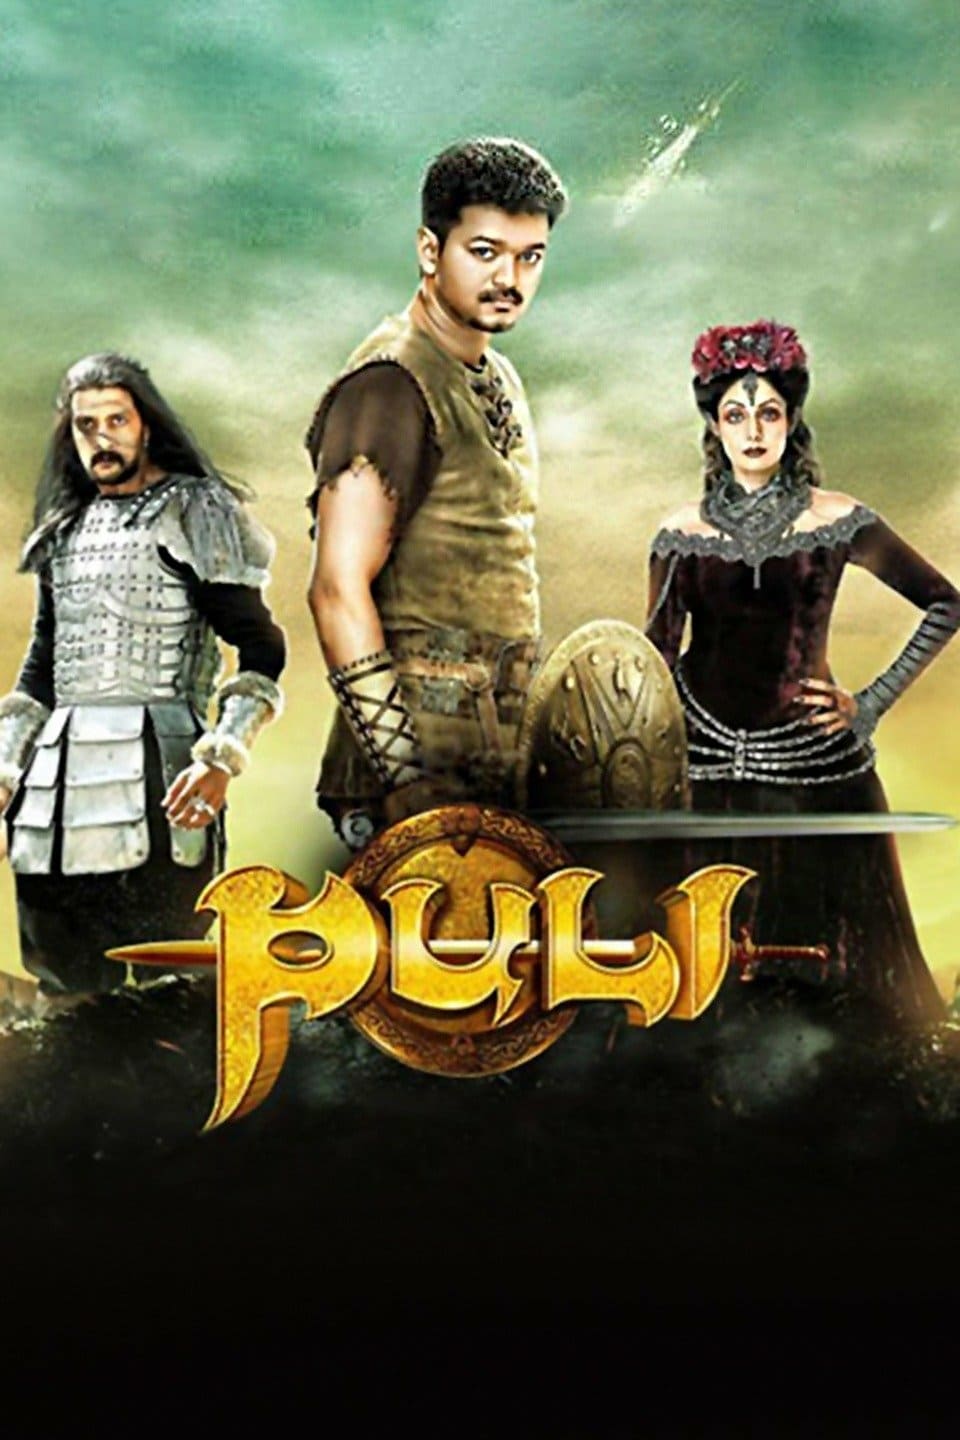 Poster for the movie "Puli"